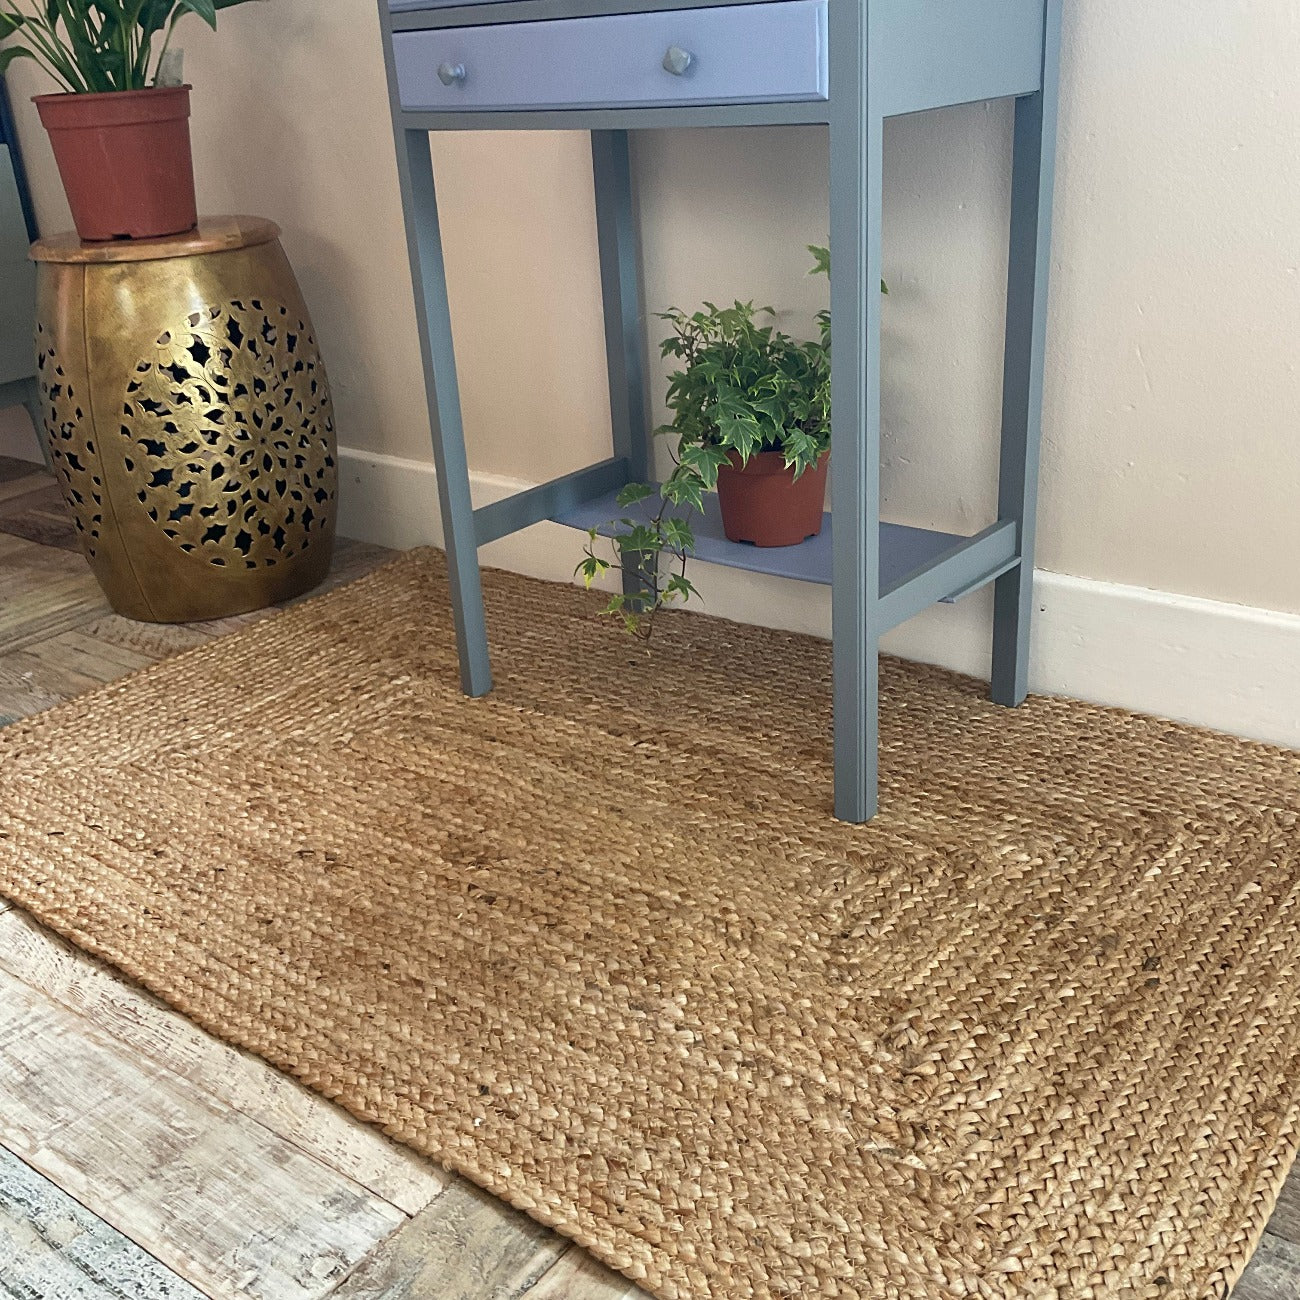 Braided Natural Jute Rug with a Frenchic Upcycled Blue Console Table and a Plant stand